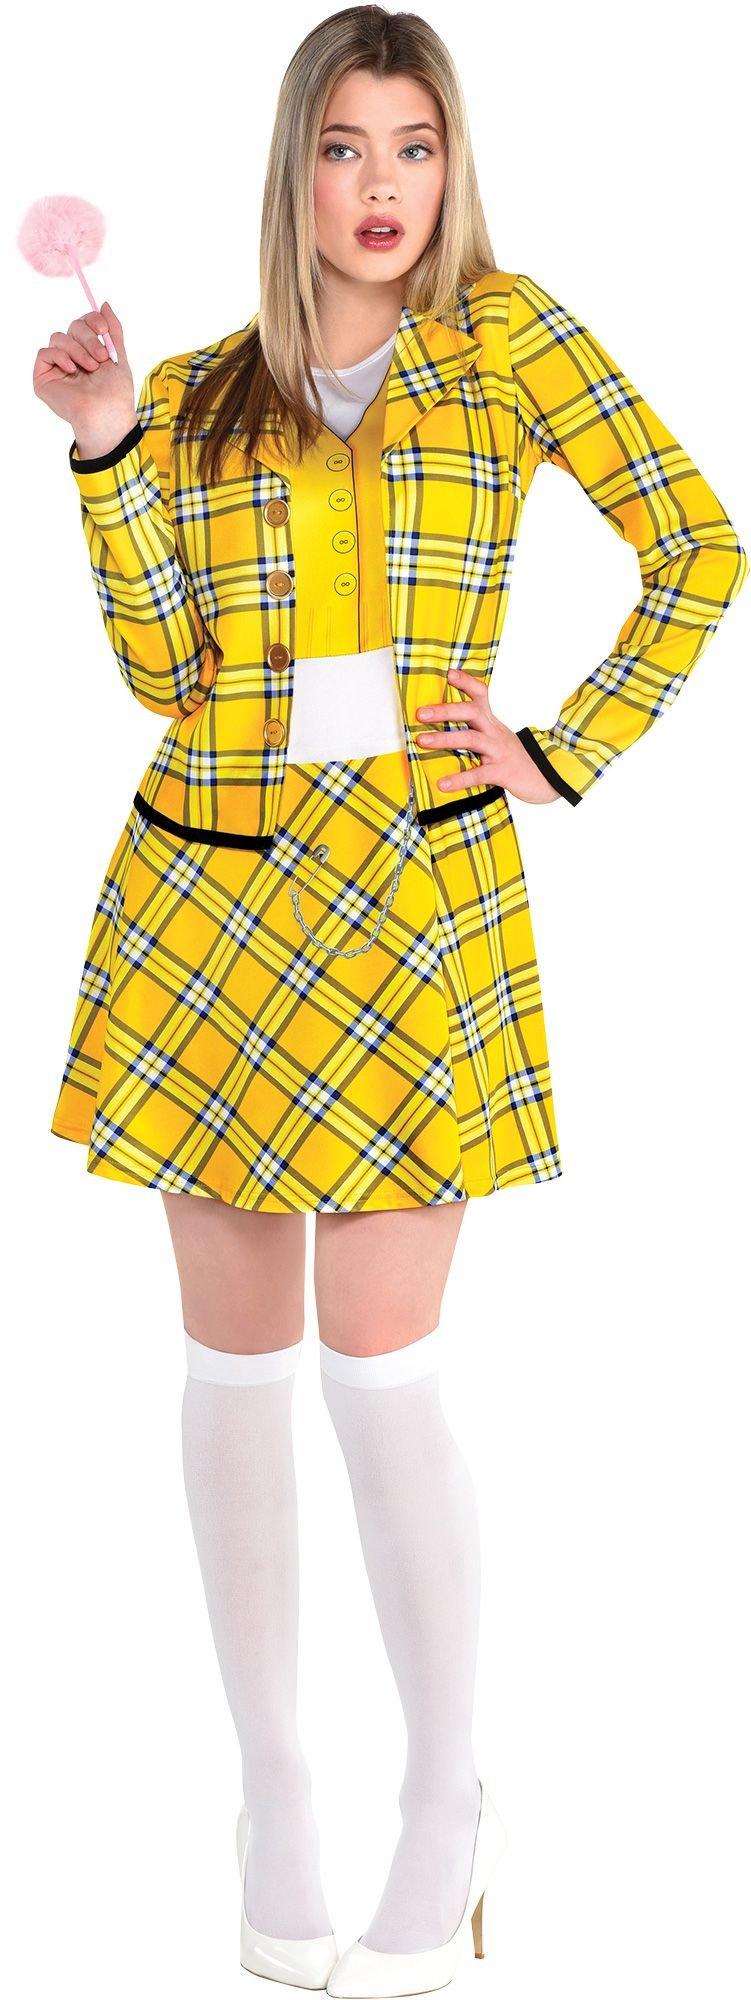 Cher Clueless Costume Cher Clueless Costume, Clueless Costume, Outfits ...